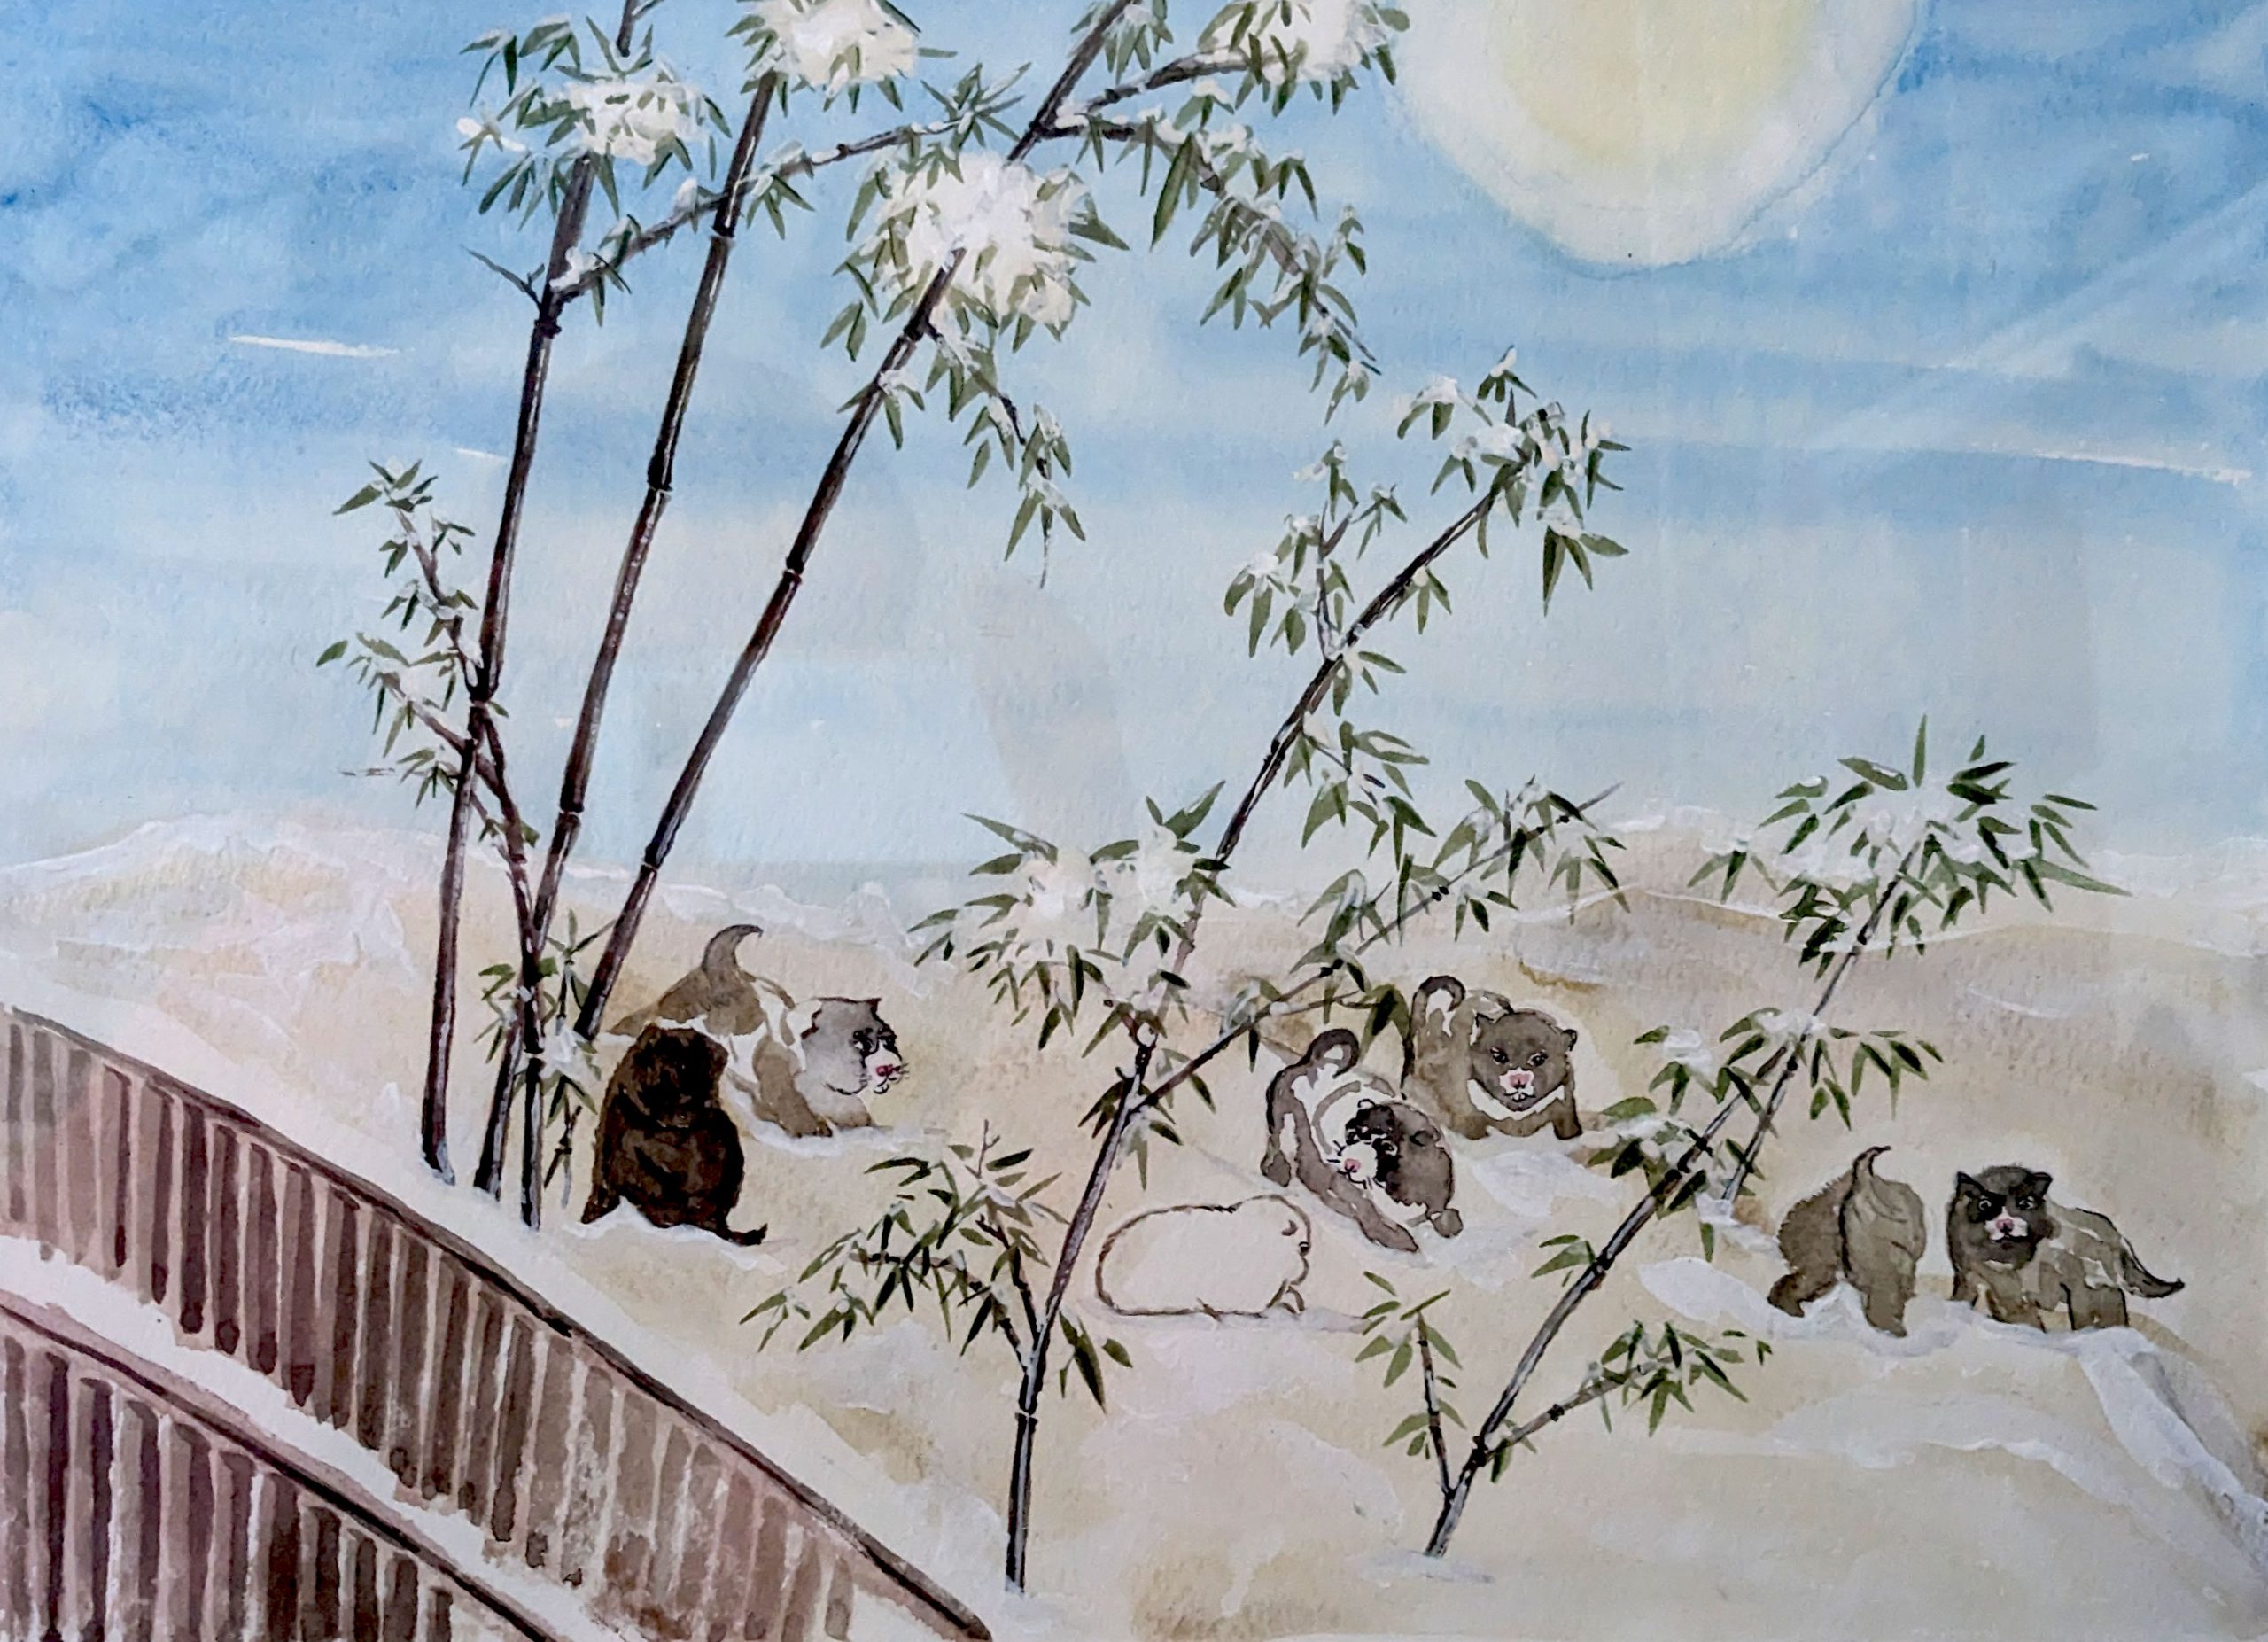 Reproduction of Maruyama Ōkyo's Puppies among Bamboo in Snow 